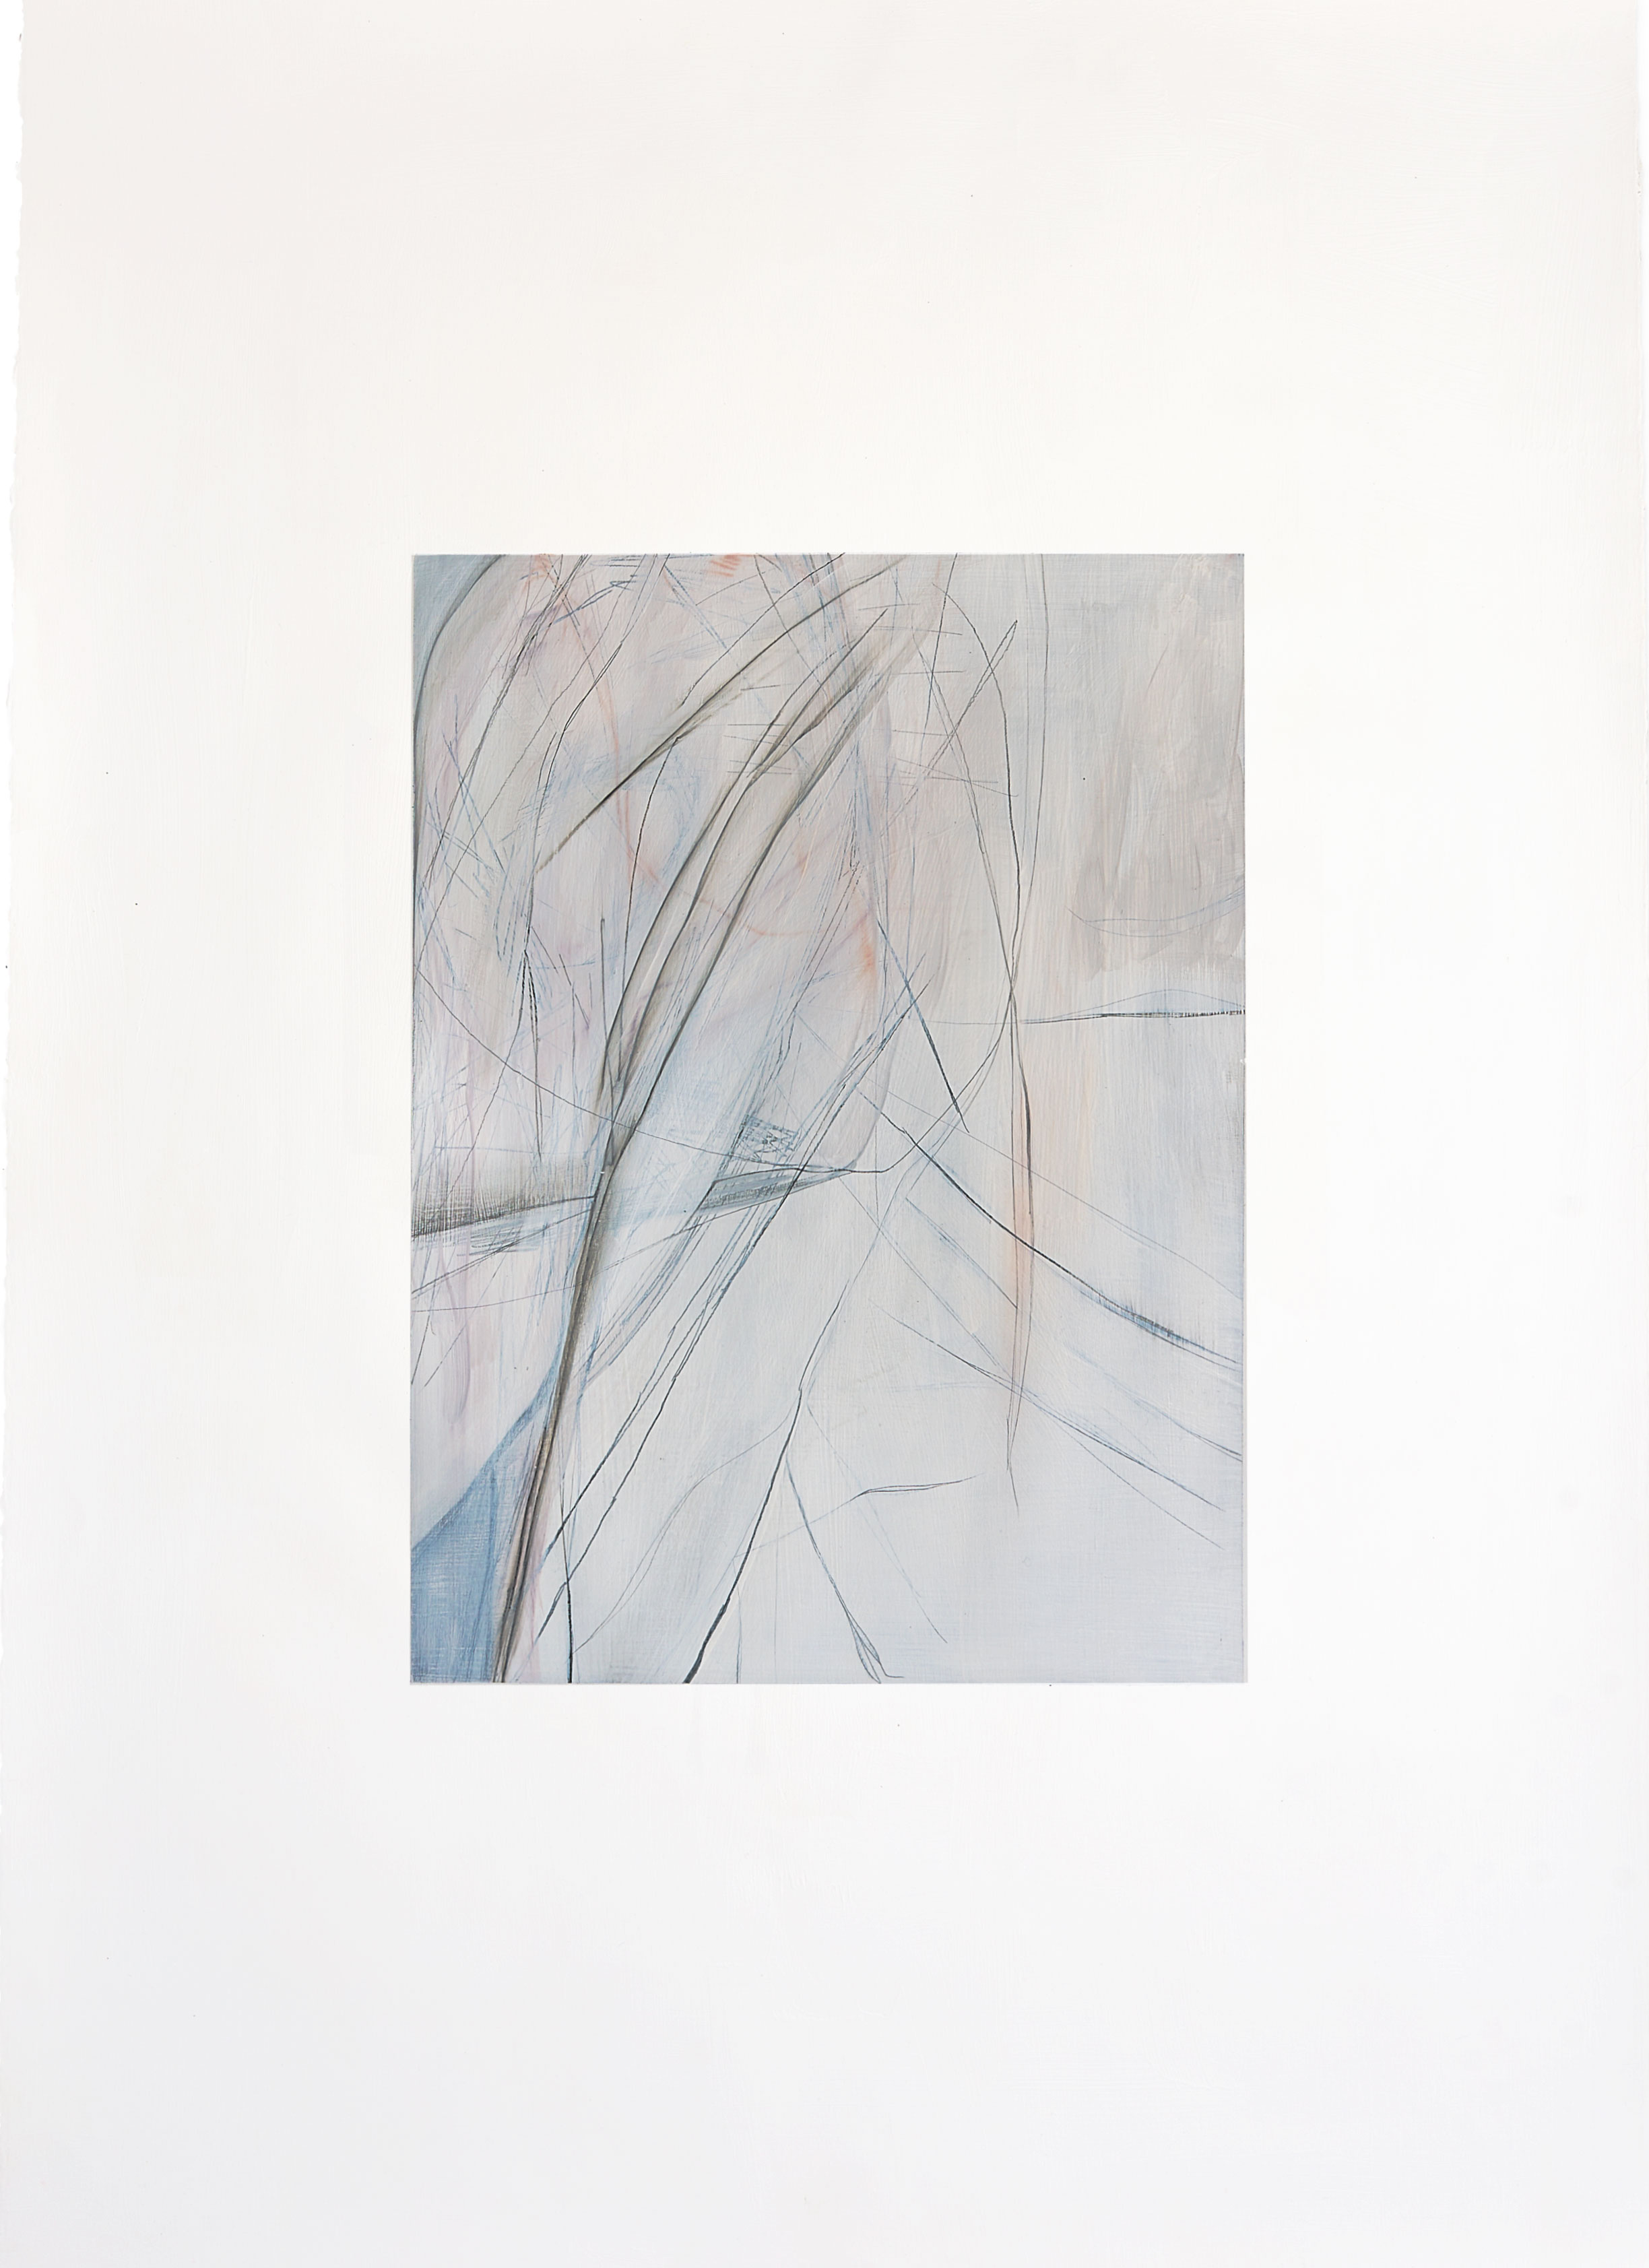 An abstract vertical painting by artist Caroline Coolidge with delicate lines in shades of pink, orange, blue, and gray creating tree-like imagery.